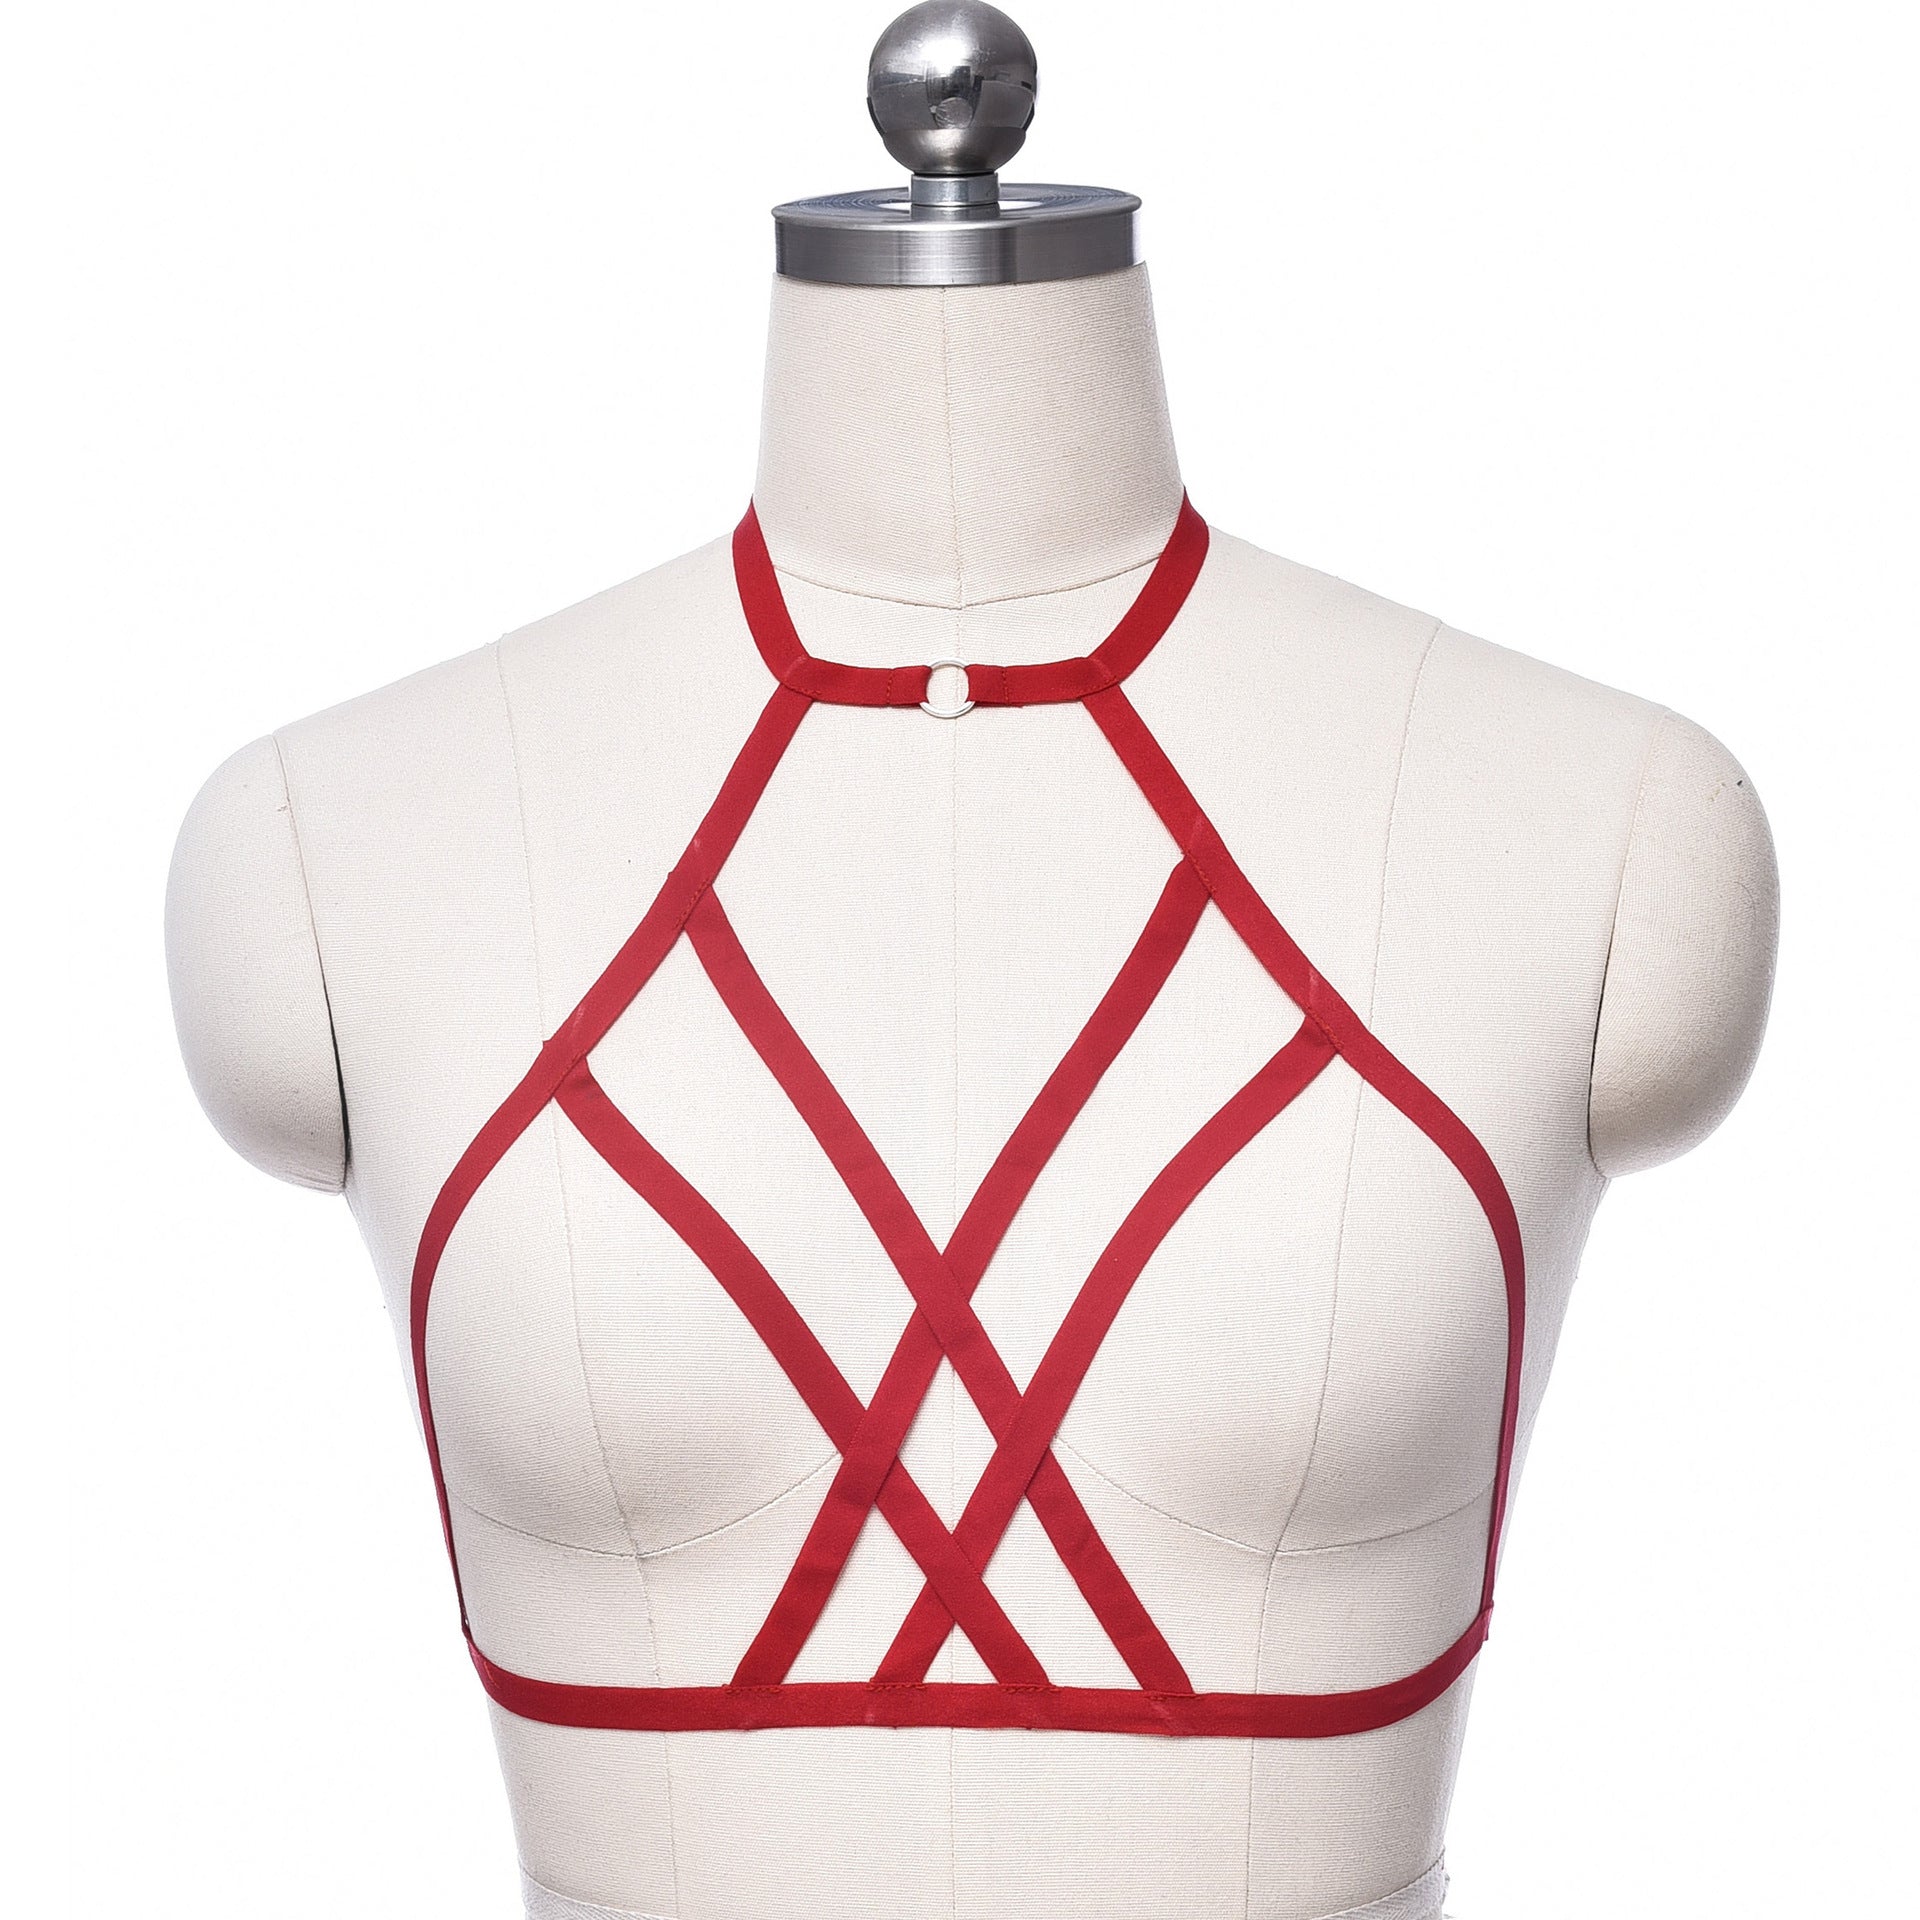 Wife Bra for Sexy Naughty Sexy Harness Lingerie